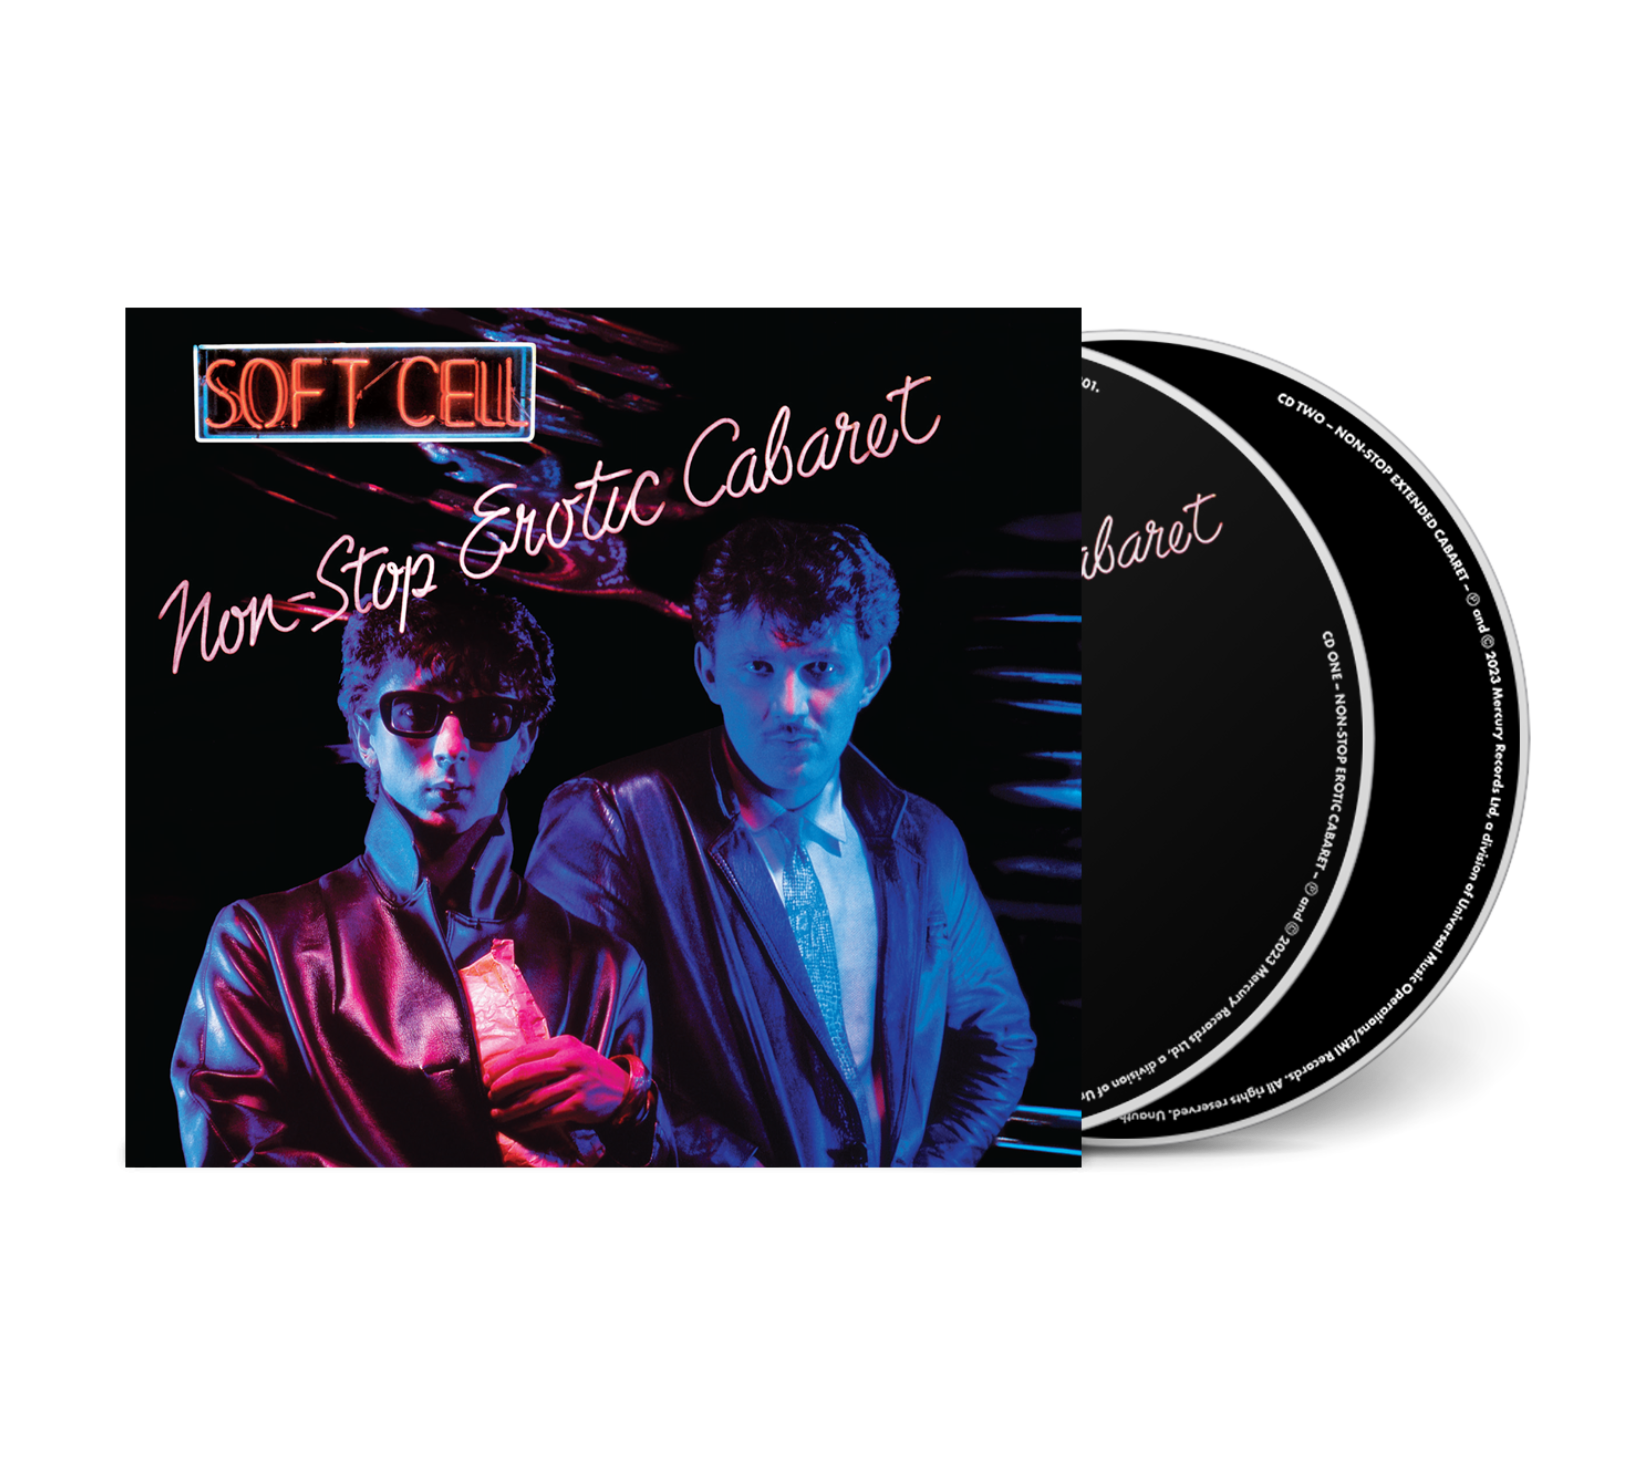 Soft Cell - Non-Stop Erotic Cabaret Deluxe Hardback Book 2CD